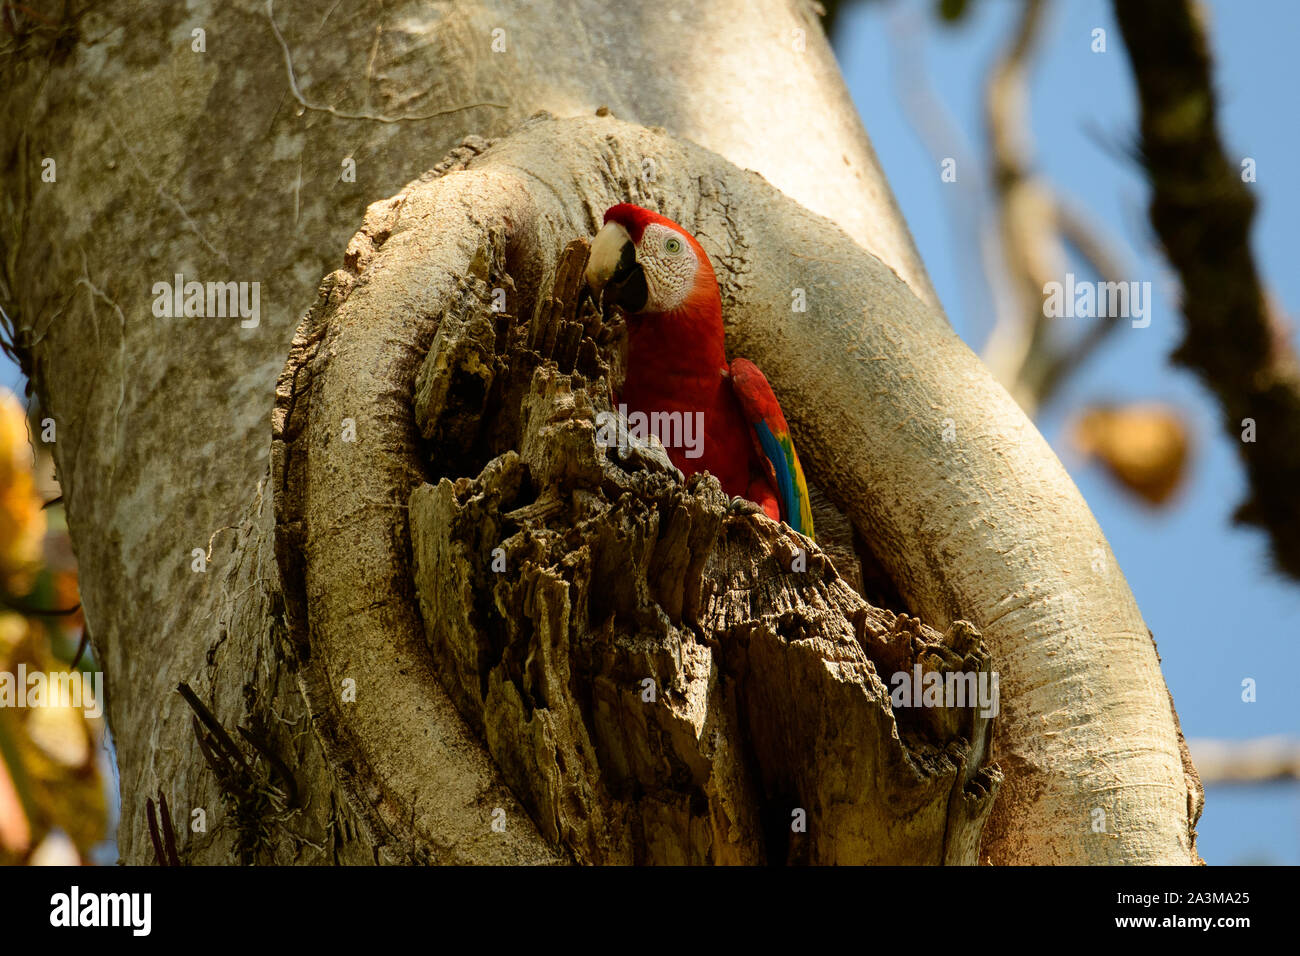 scarlet macaw at its nest site Stock Photo